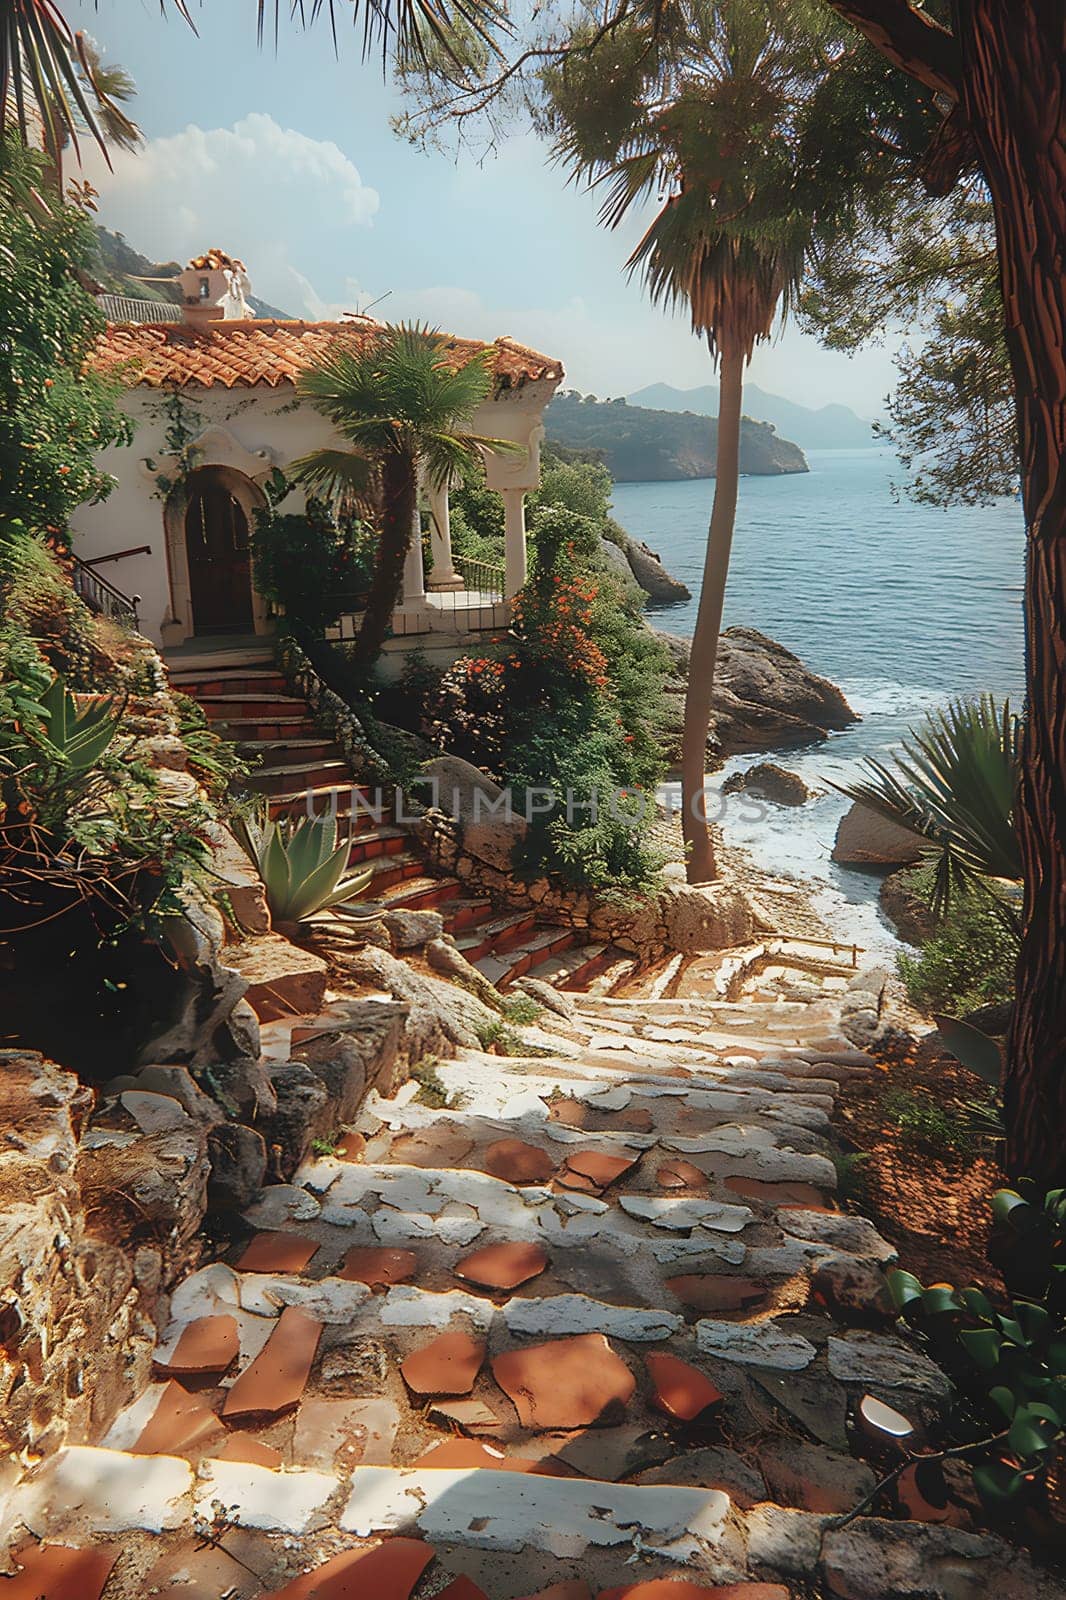 Stairway leads to oceanview house surrounded by trees and natural landscape by Nadtochiy